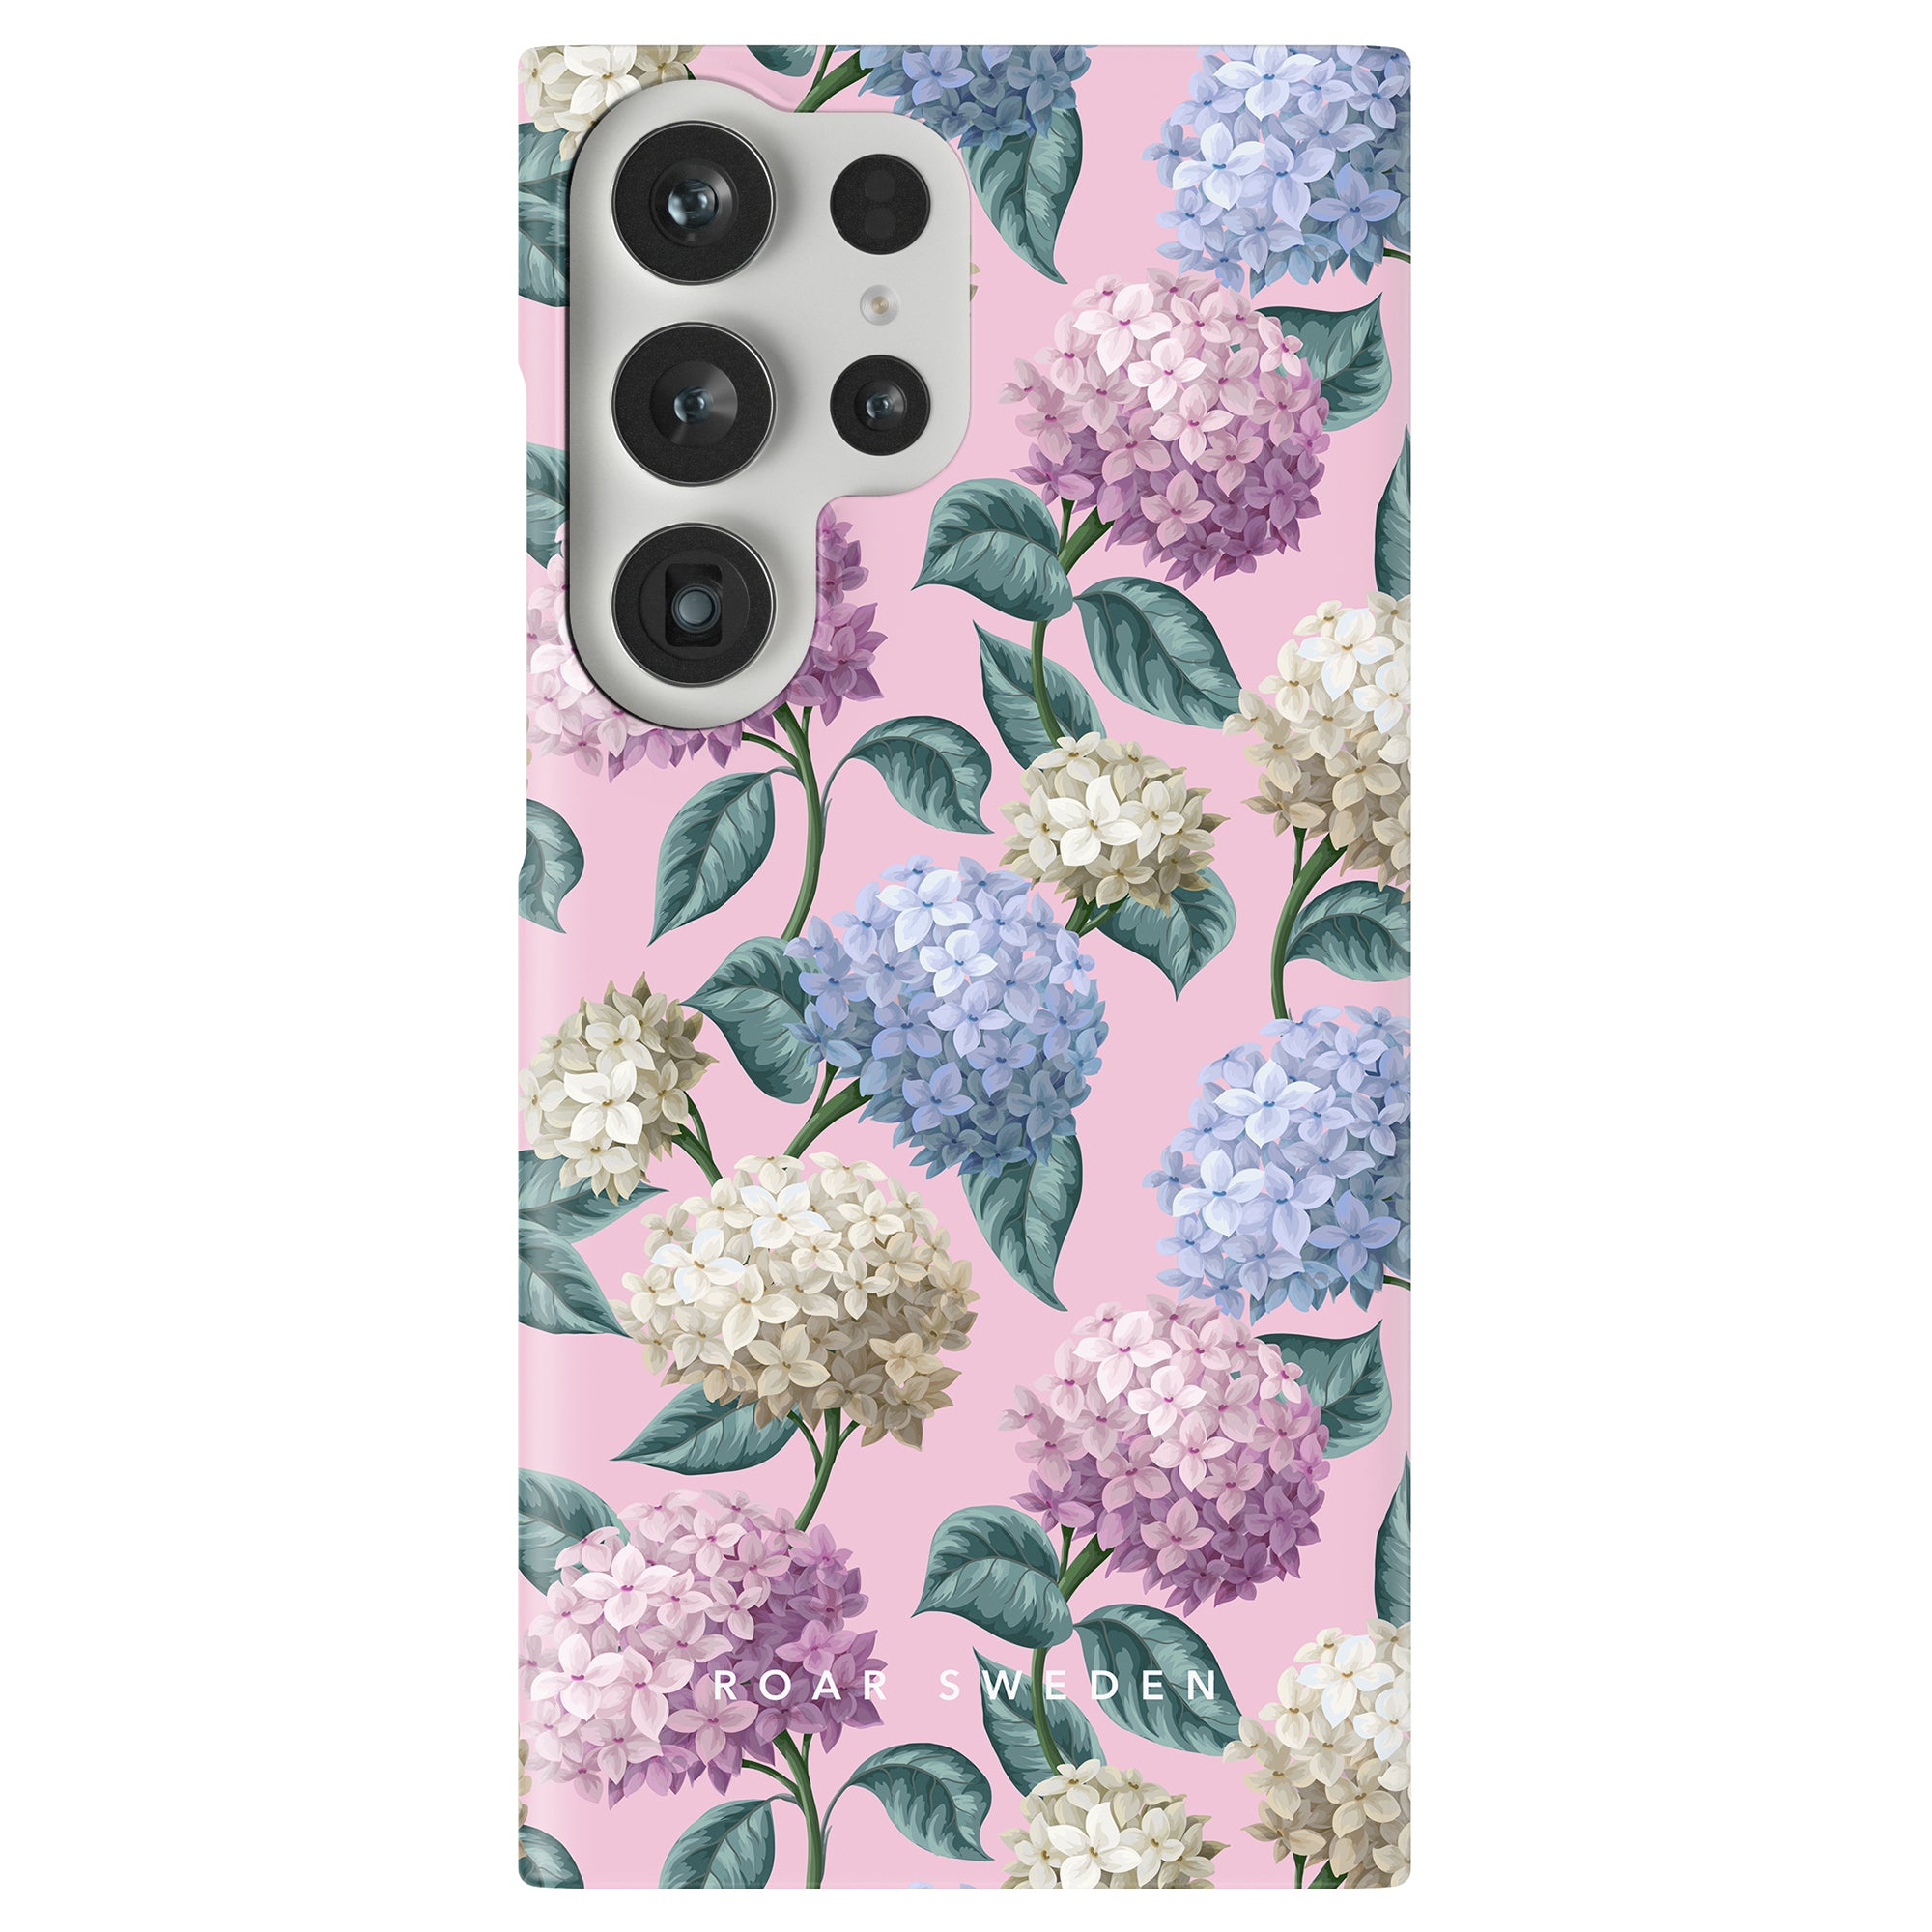 A smartphone with a Hydrangea - Slim case featuring hydrangeas in pastel colors on a pink background. The case brand "ROAR SWEDEN" is visible at the bottom, part of their exclusive sommarkollektion.